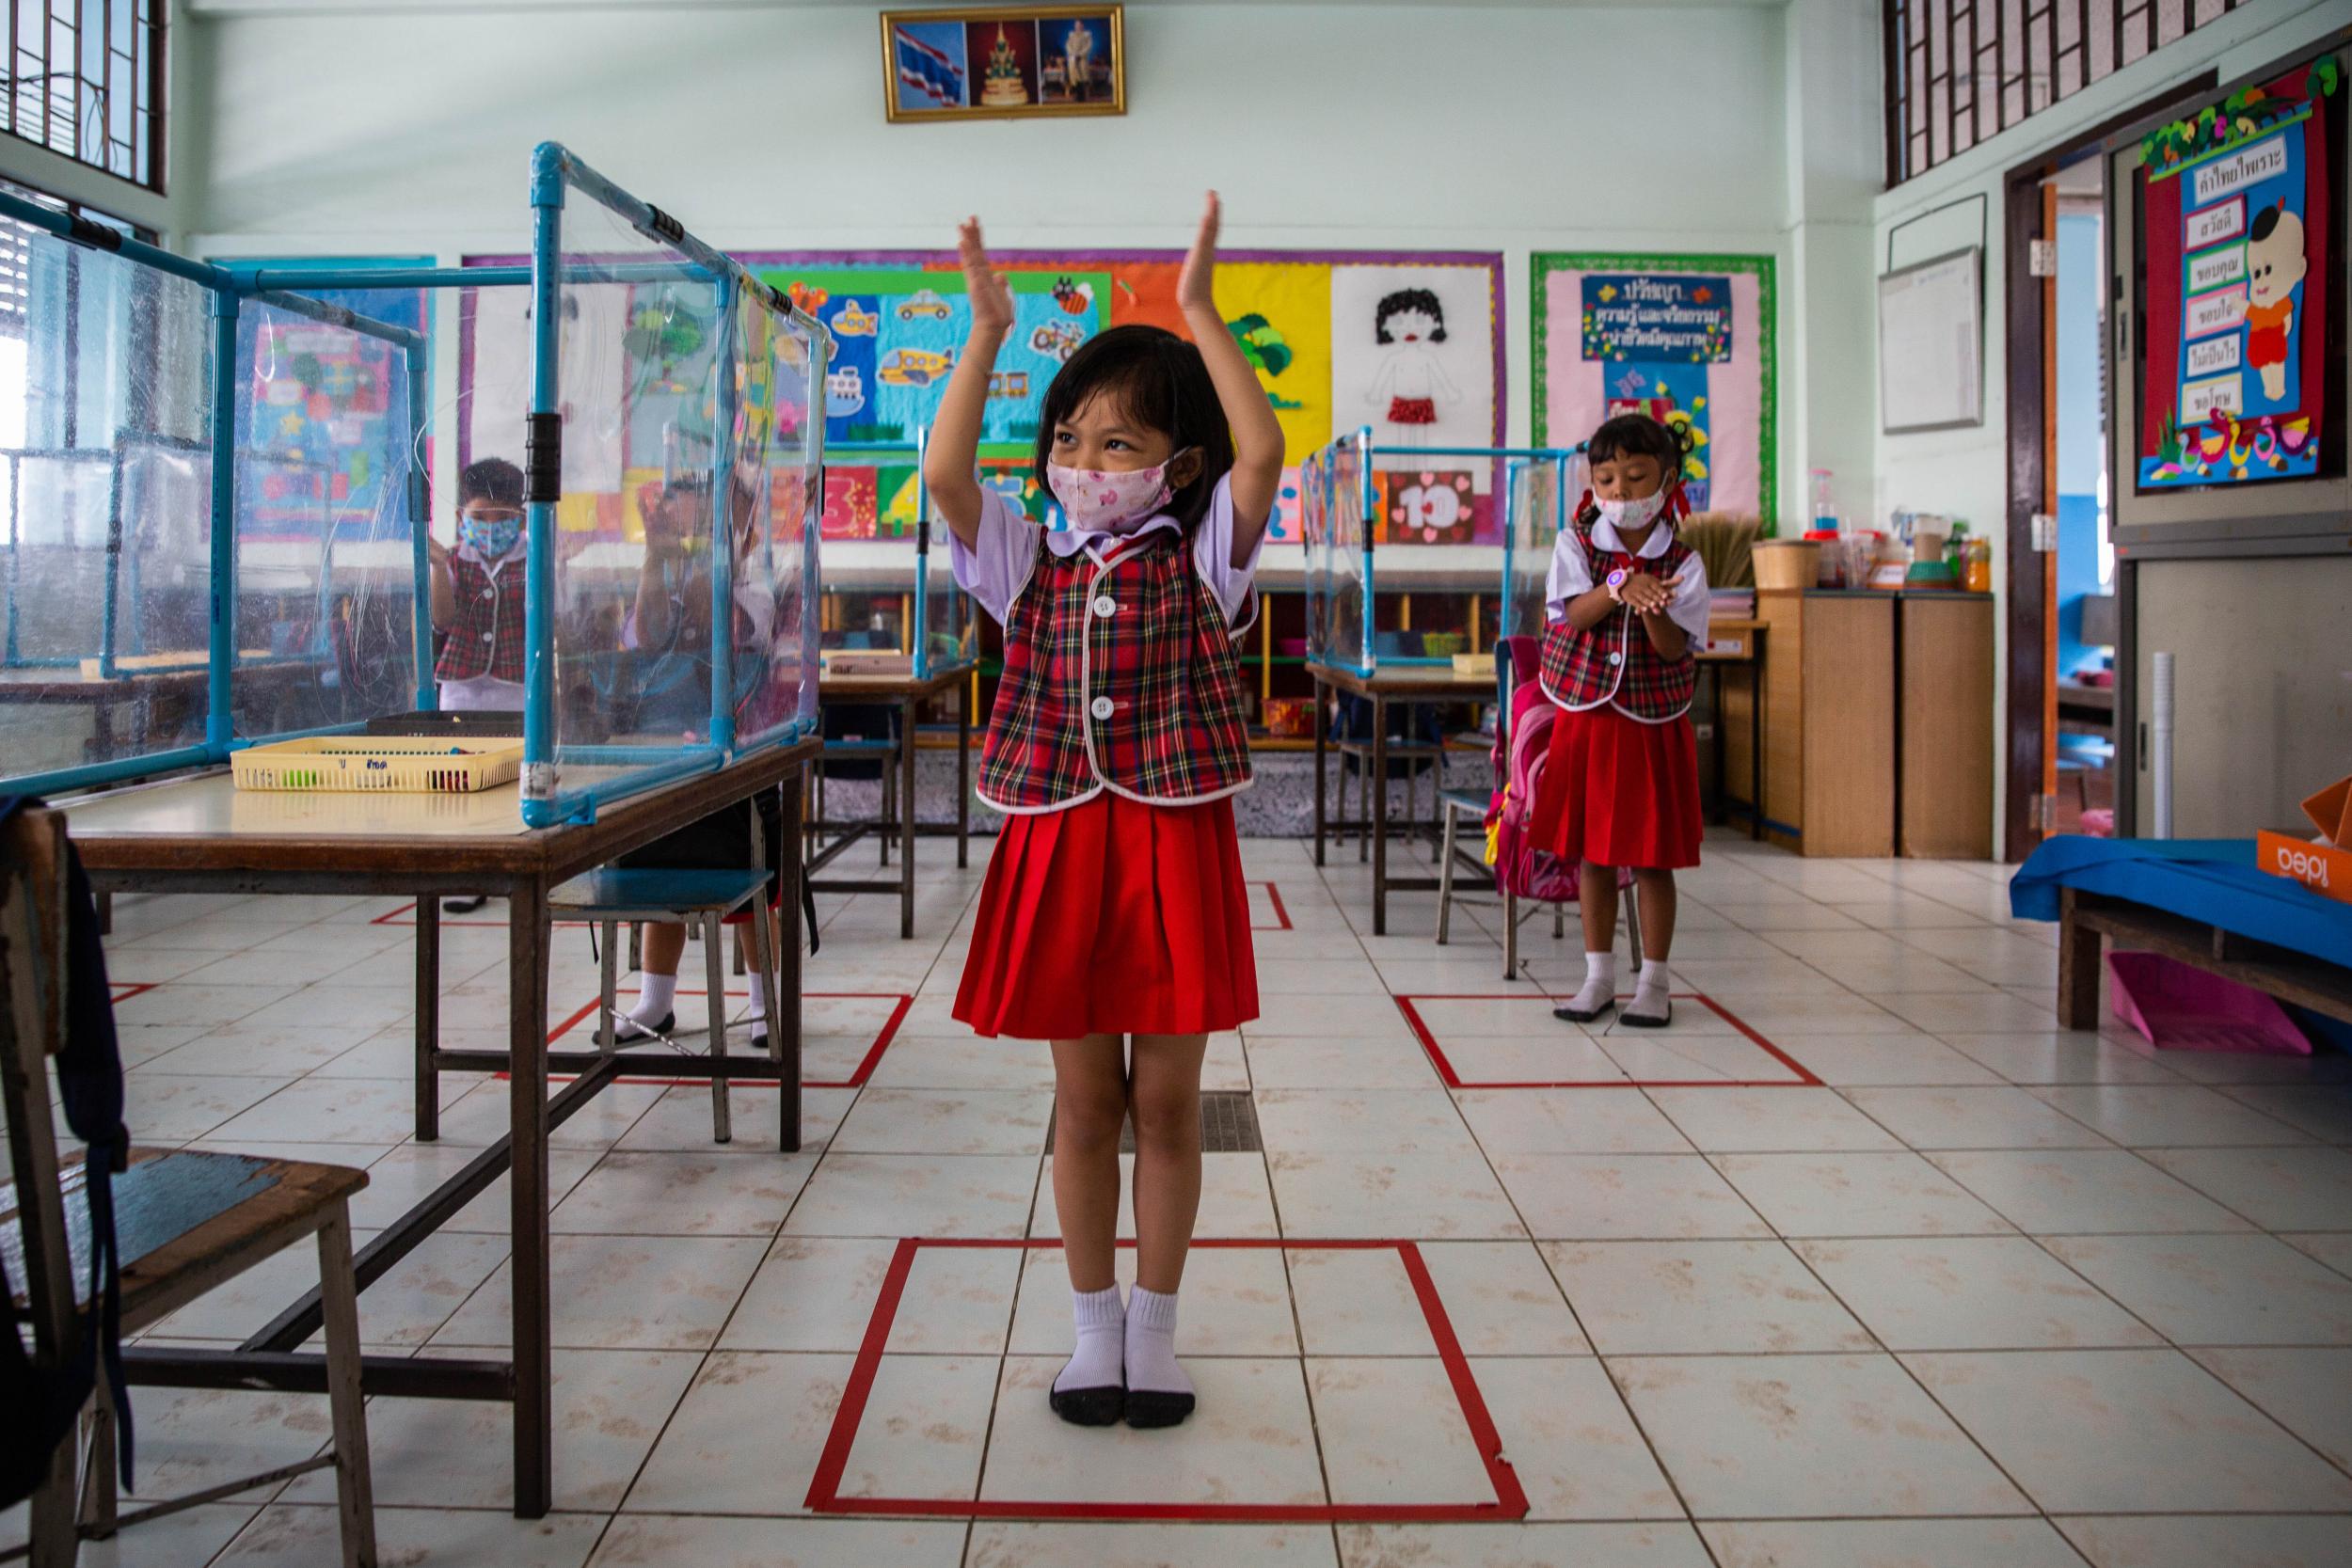 Pupils stand in socially distanced boxes that are marked out in a classroom at Wat Khlong Toey School in Bangkok, Thailand, on August 10, 2020. (Lauren DeCicca/Getty Images )